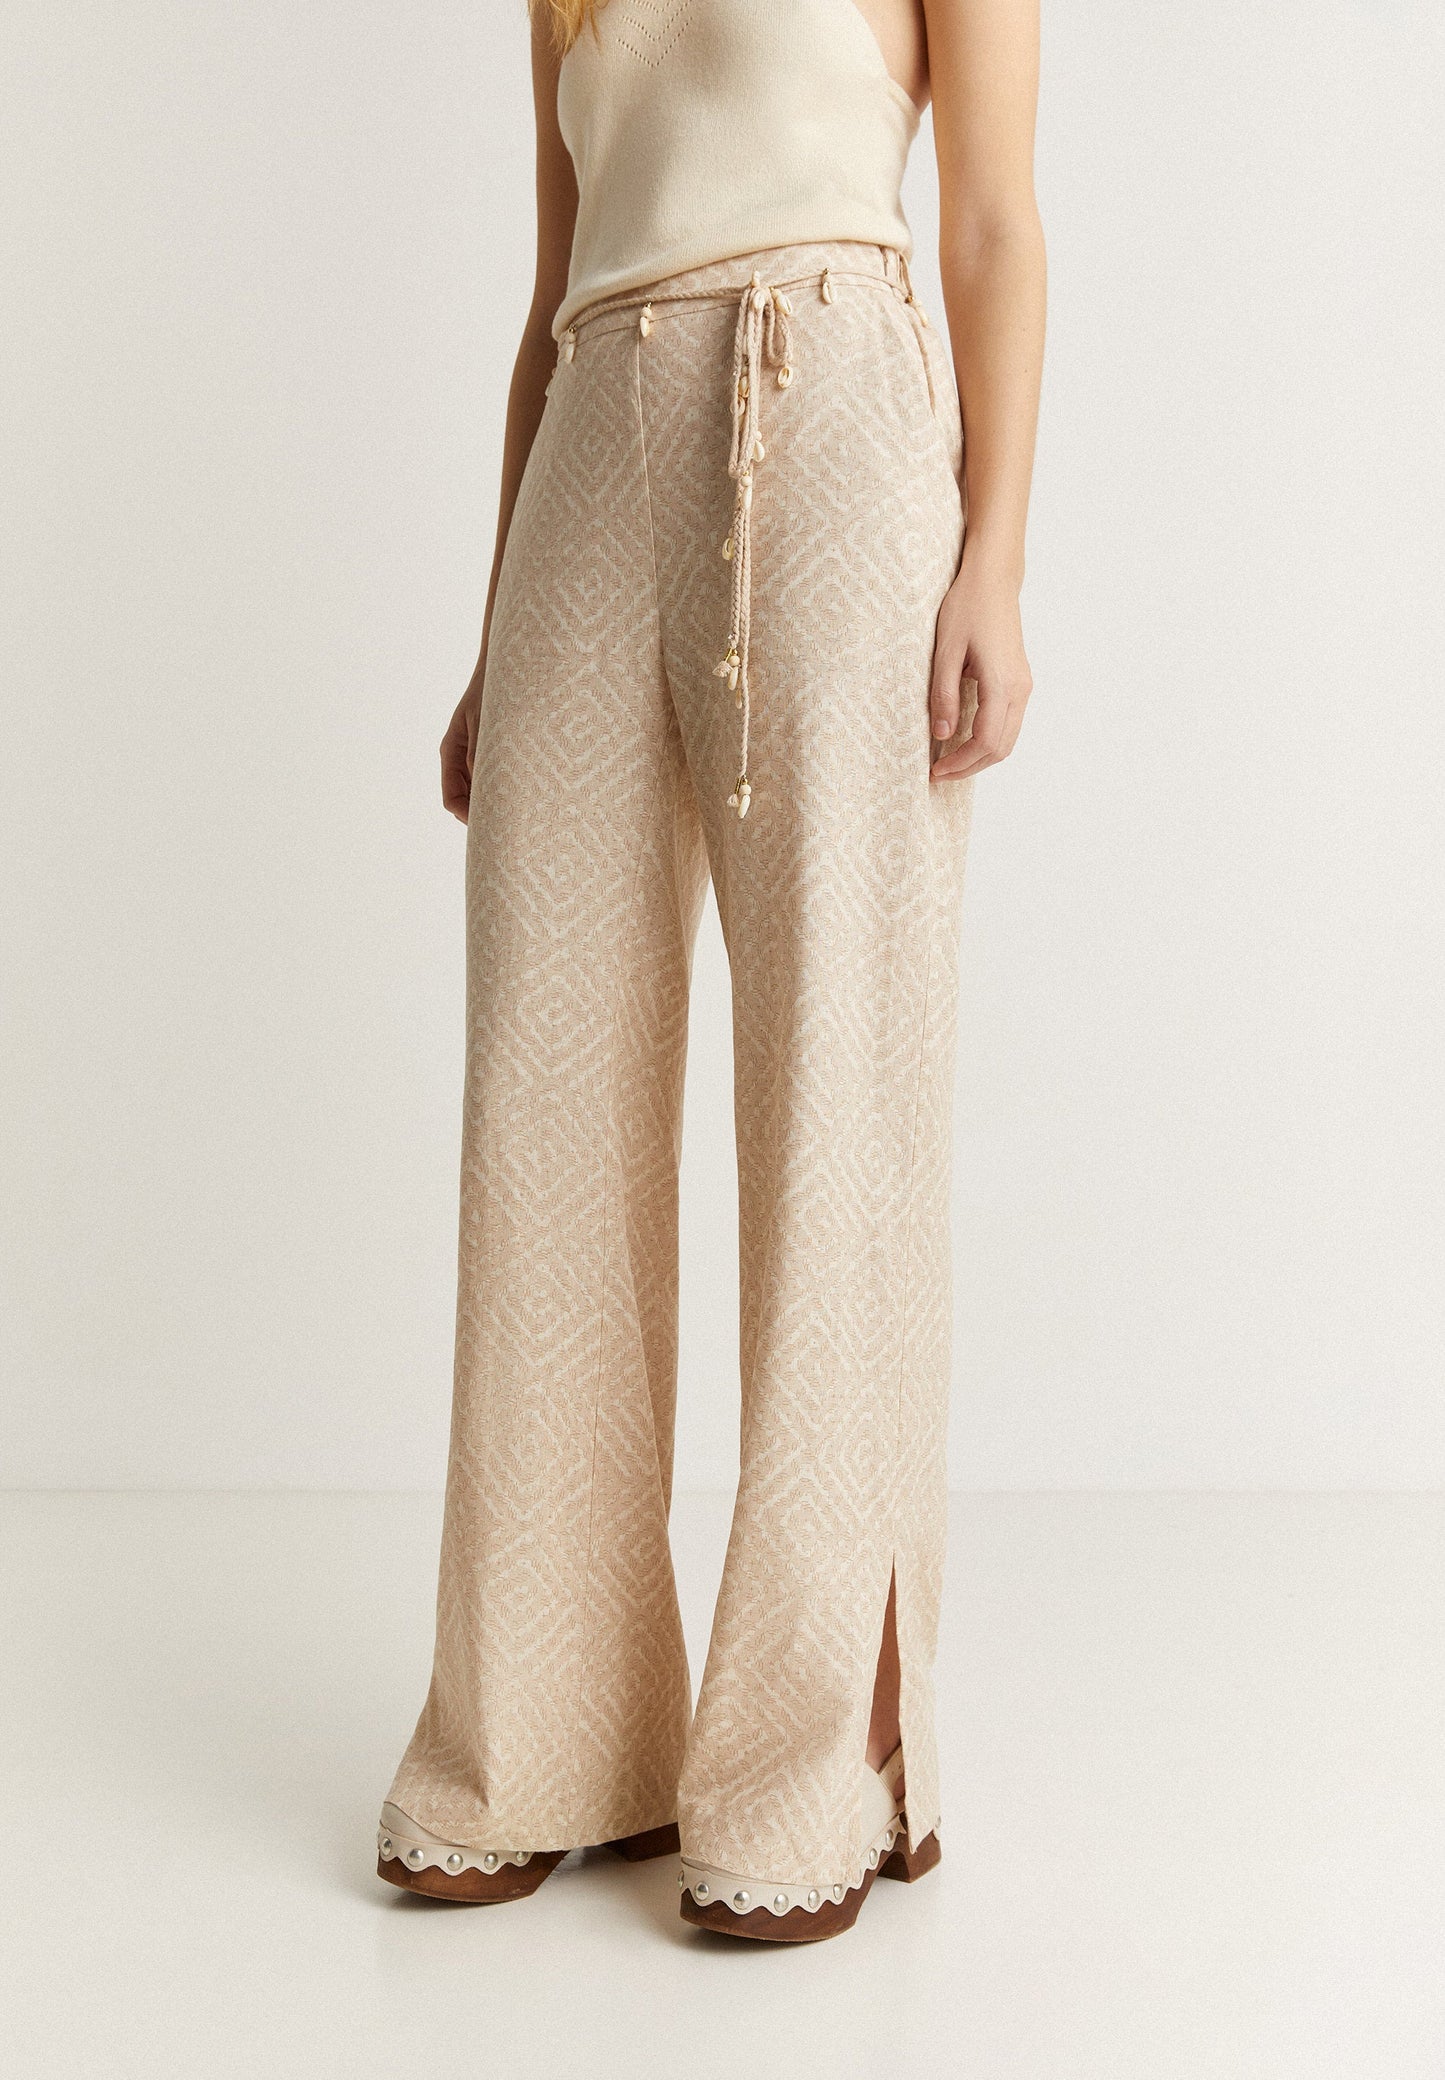 PRINTED LINEN TROUSERS